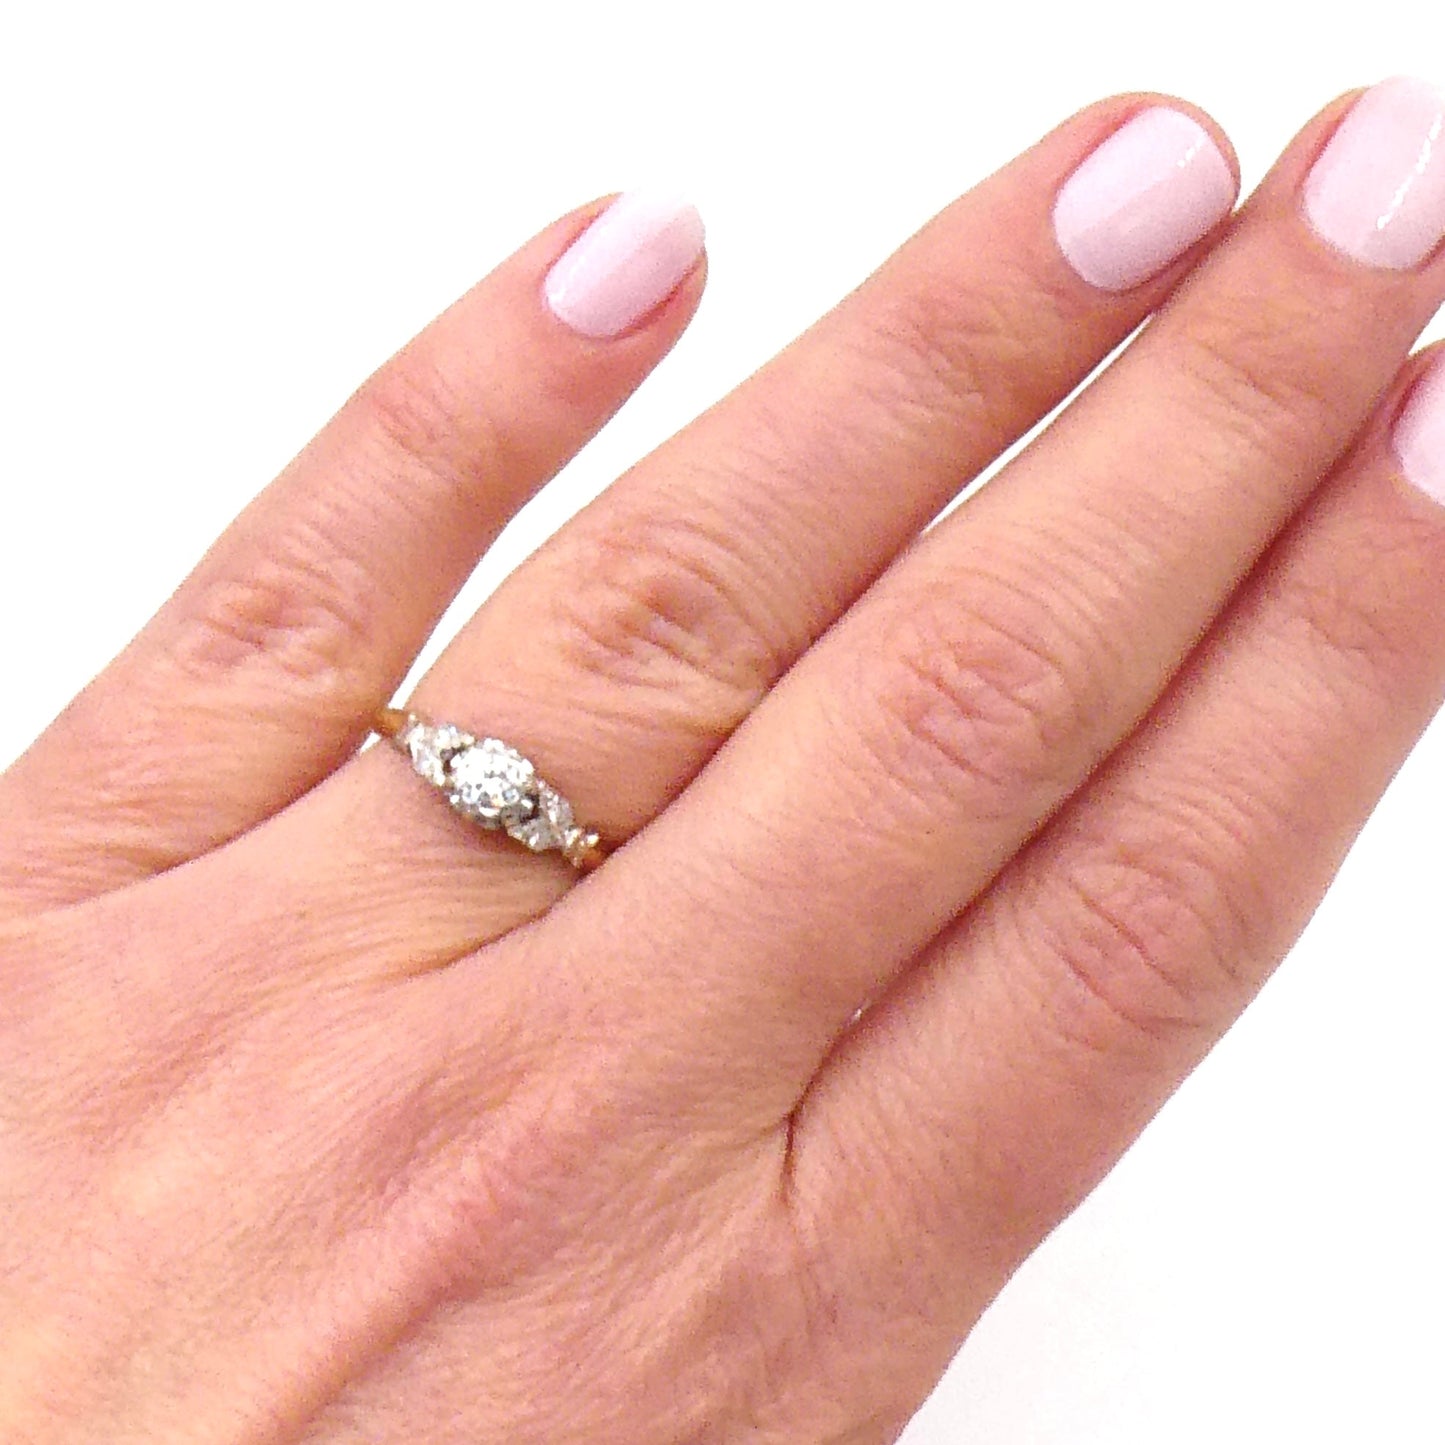 A diamond ring set in a platinum leaf design in 18kt gold, a beautiful vintage diamond ring. - Collected